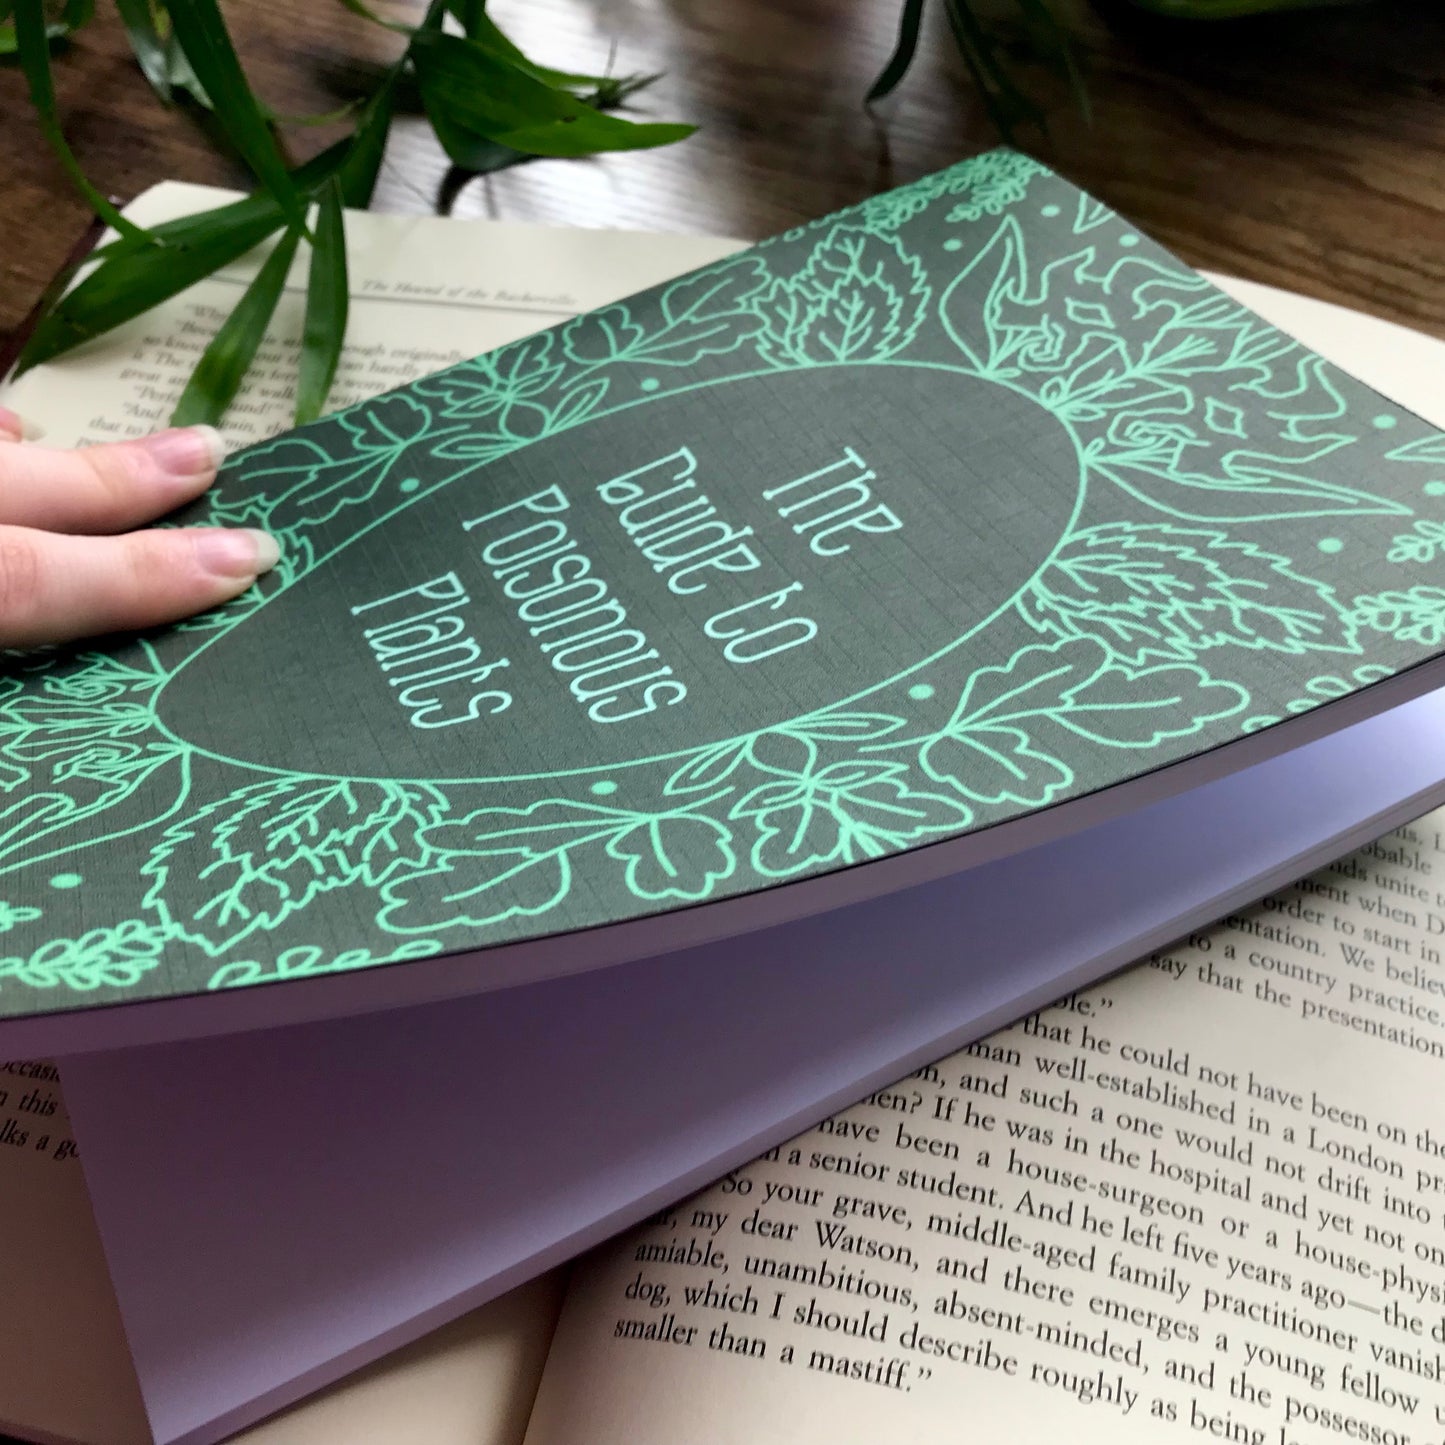 The Guide to Poisonous Plants, A5 Softcover Notebook